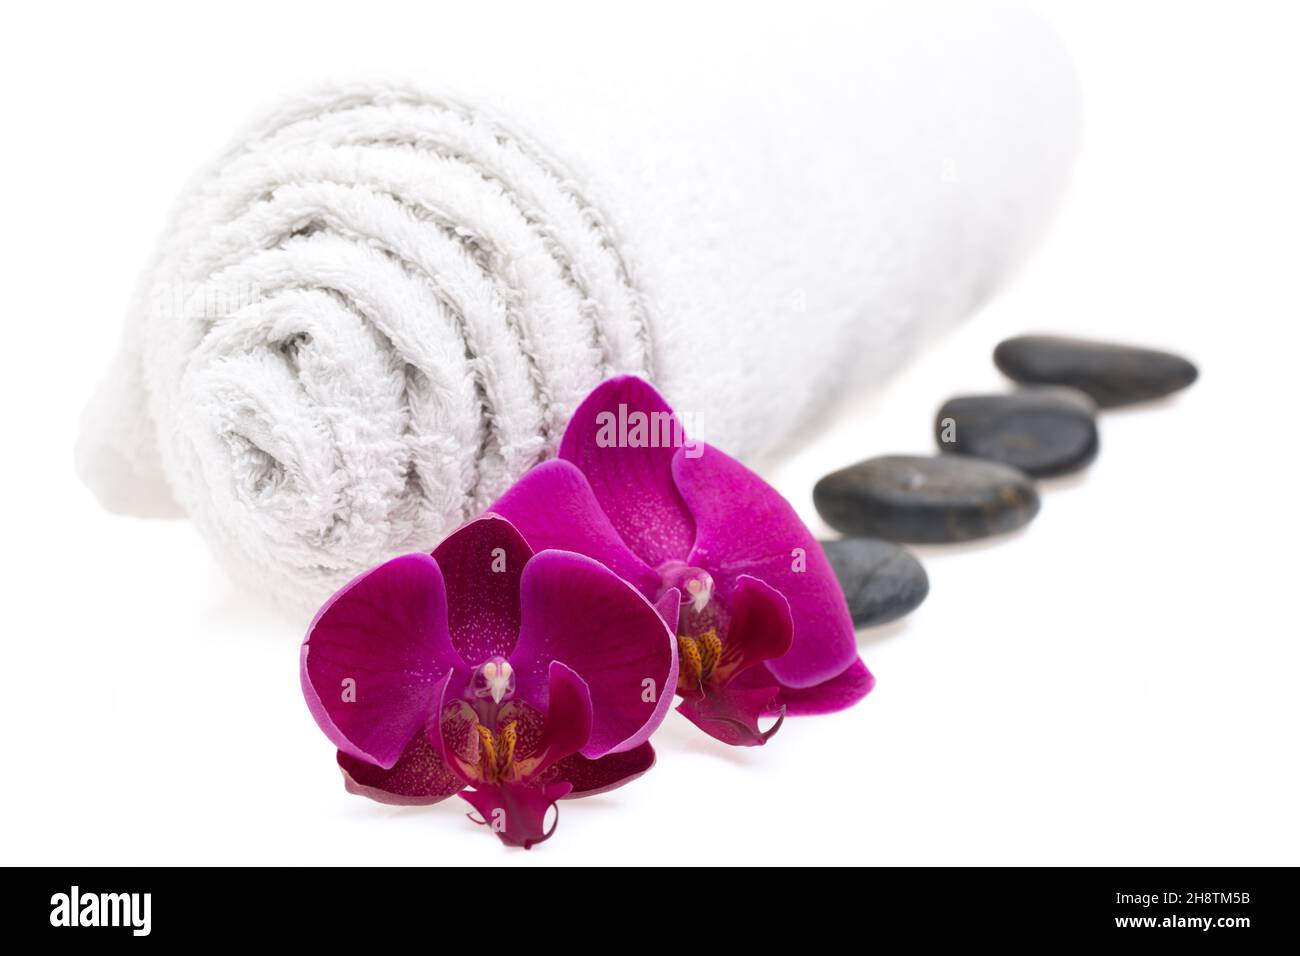 Towel, stones and flowers isolated on white background Stock Photo